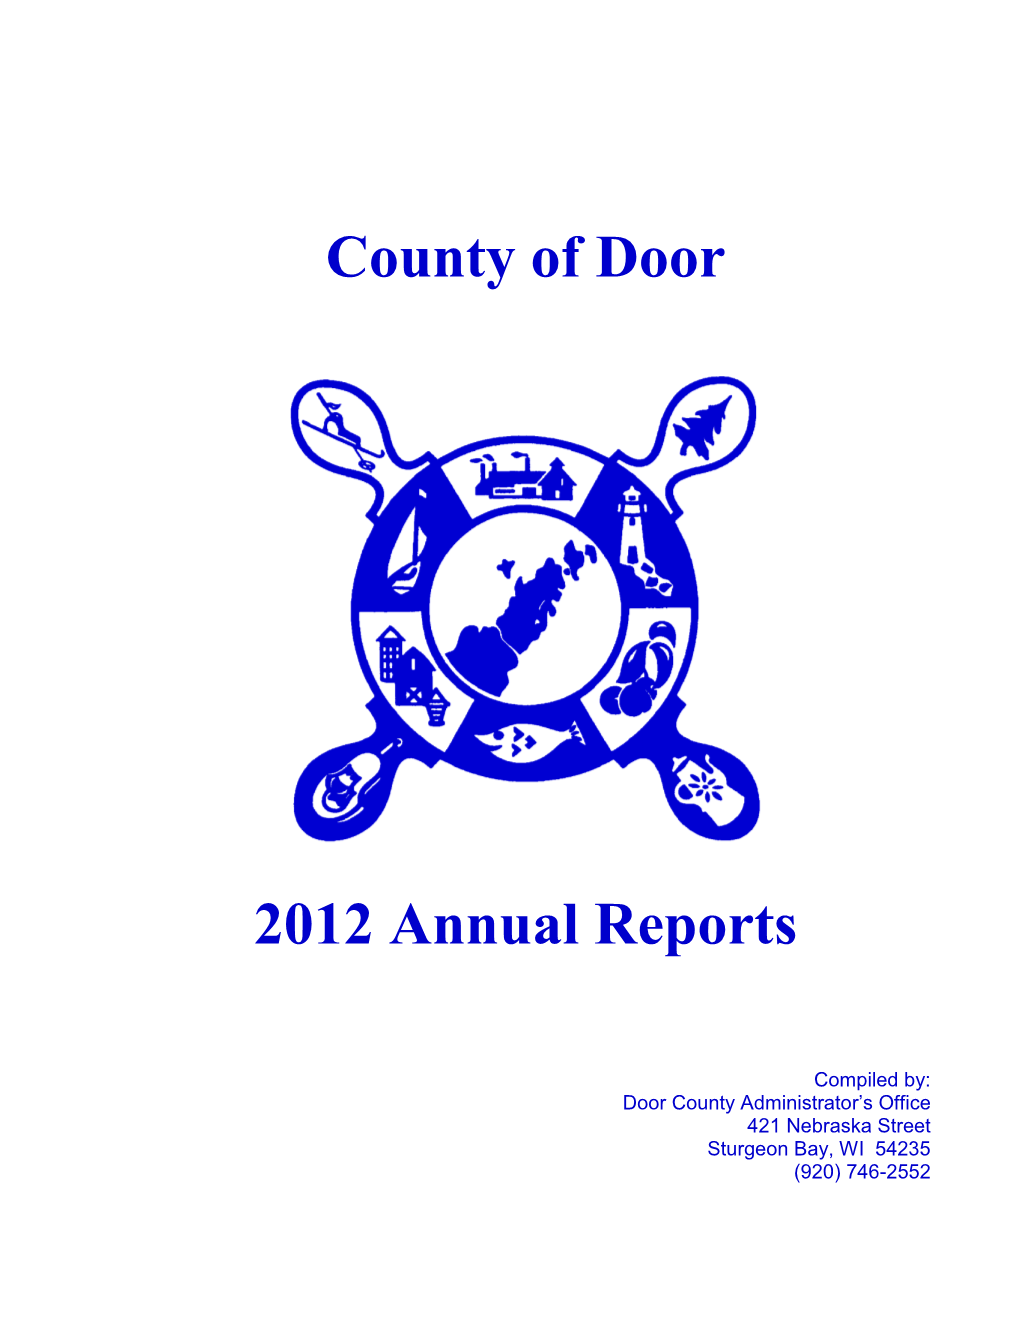 County of Door 2012 Annual Reports